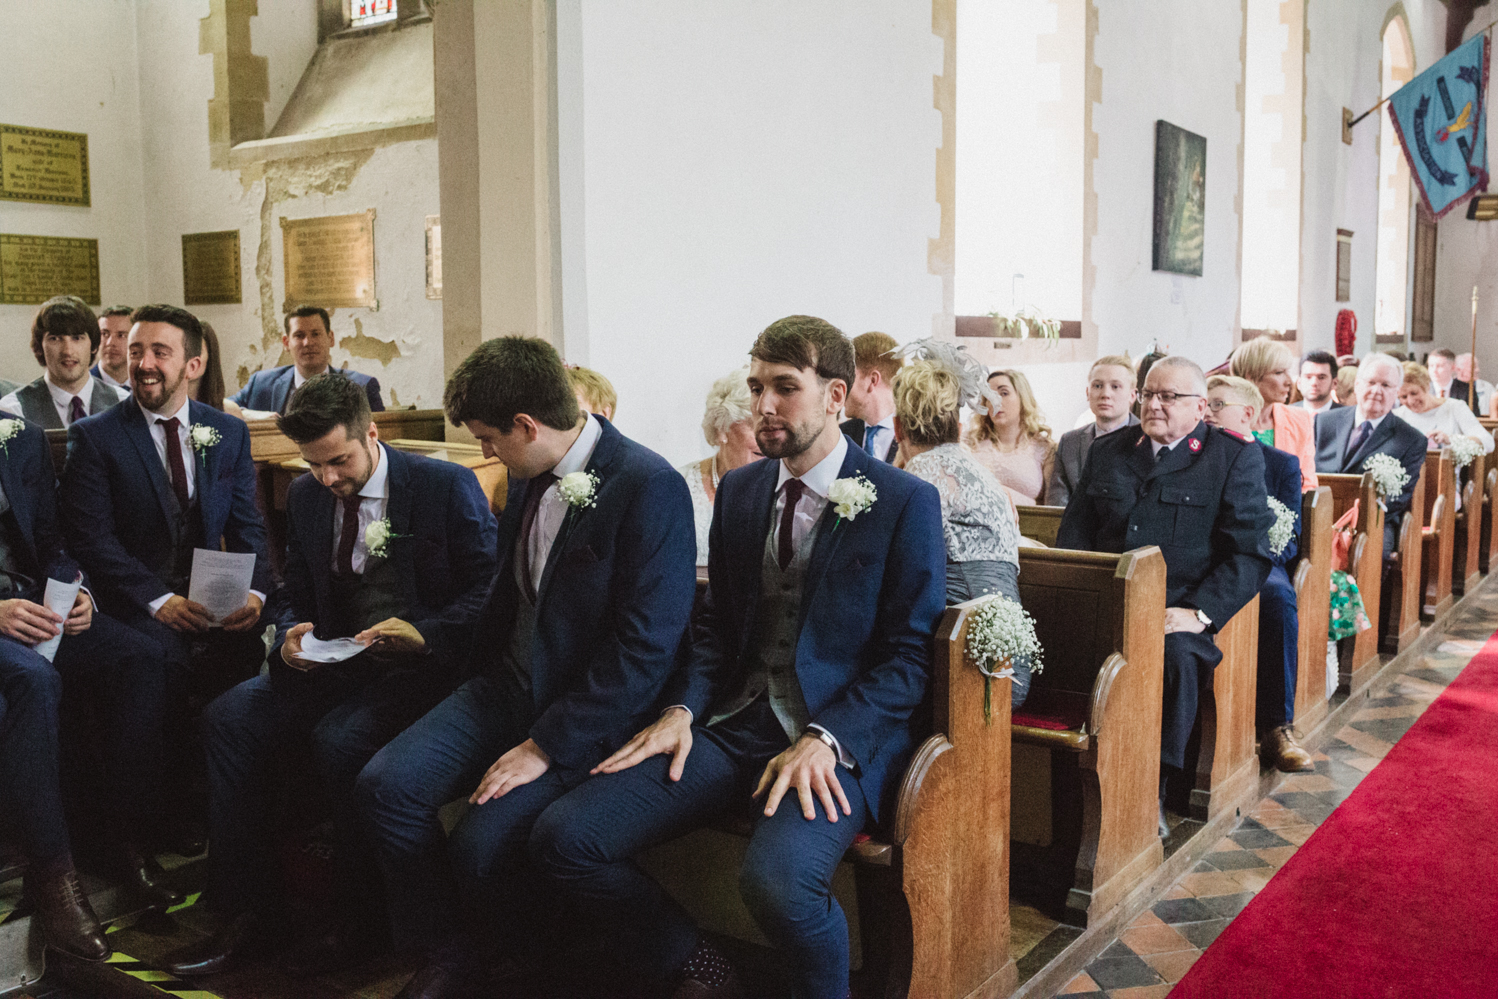 photography of relaxed wedding ceremony at worlingham church, suffolk